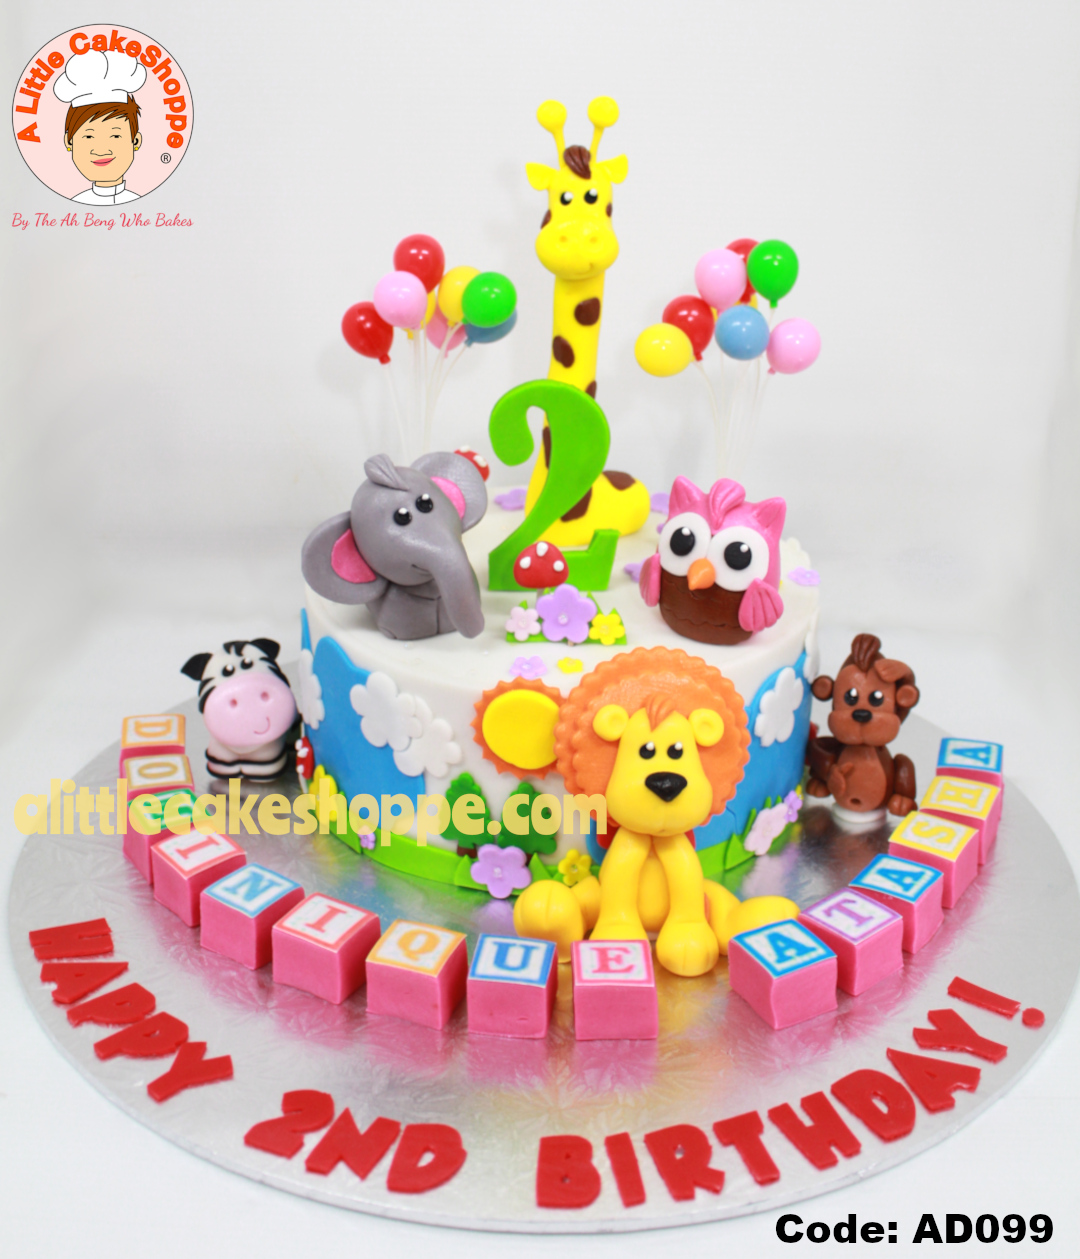 Best Cake Shop Singapore Delivery Best Customised Cake Shop Singapore customise cake custom cake 2D 3D birthday cake cupcakes desserts wedding corporate events anniversary 1st birthday 21st birthday fondant fresh cream buttercream cakes alittlecakeshoppe a little cake shoppe compliments review singapore bakers SG cake shop cakeshop ah beng who bakes sgbakes novelty cakes sgcakes licensed sfa nea cake delivery celebration cakes kids birthday cake surprise cake adult children woodland forest animal